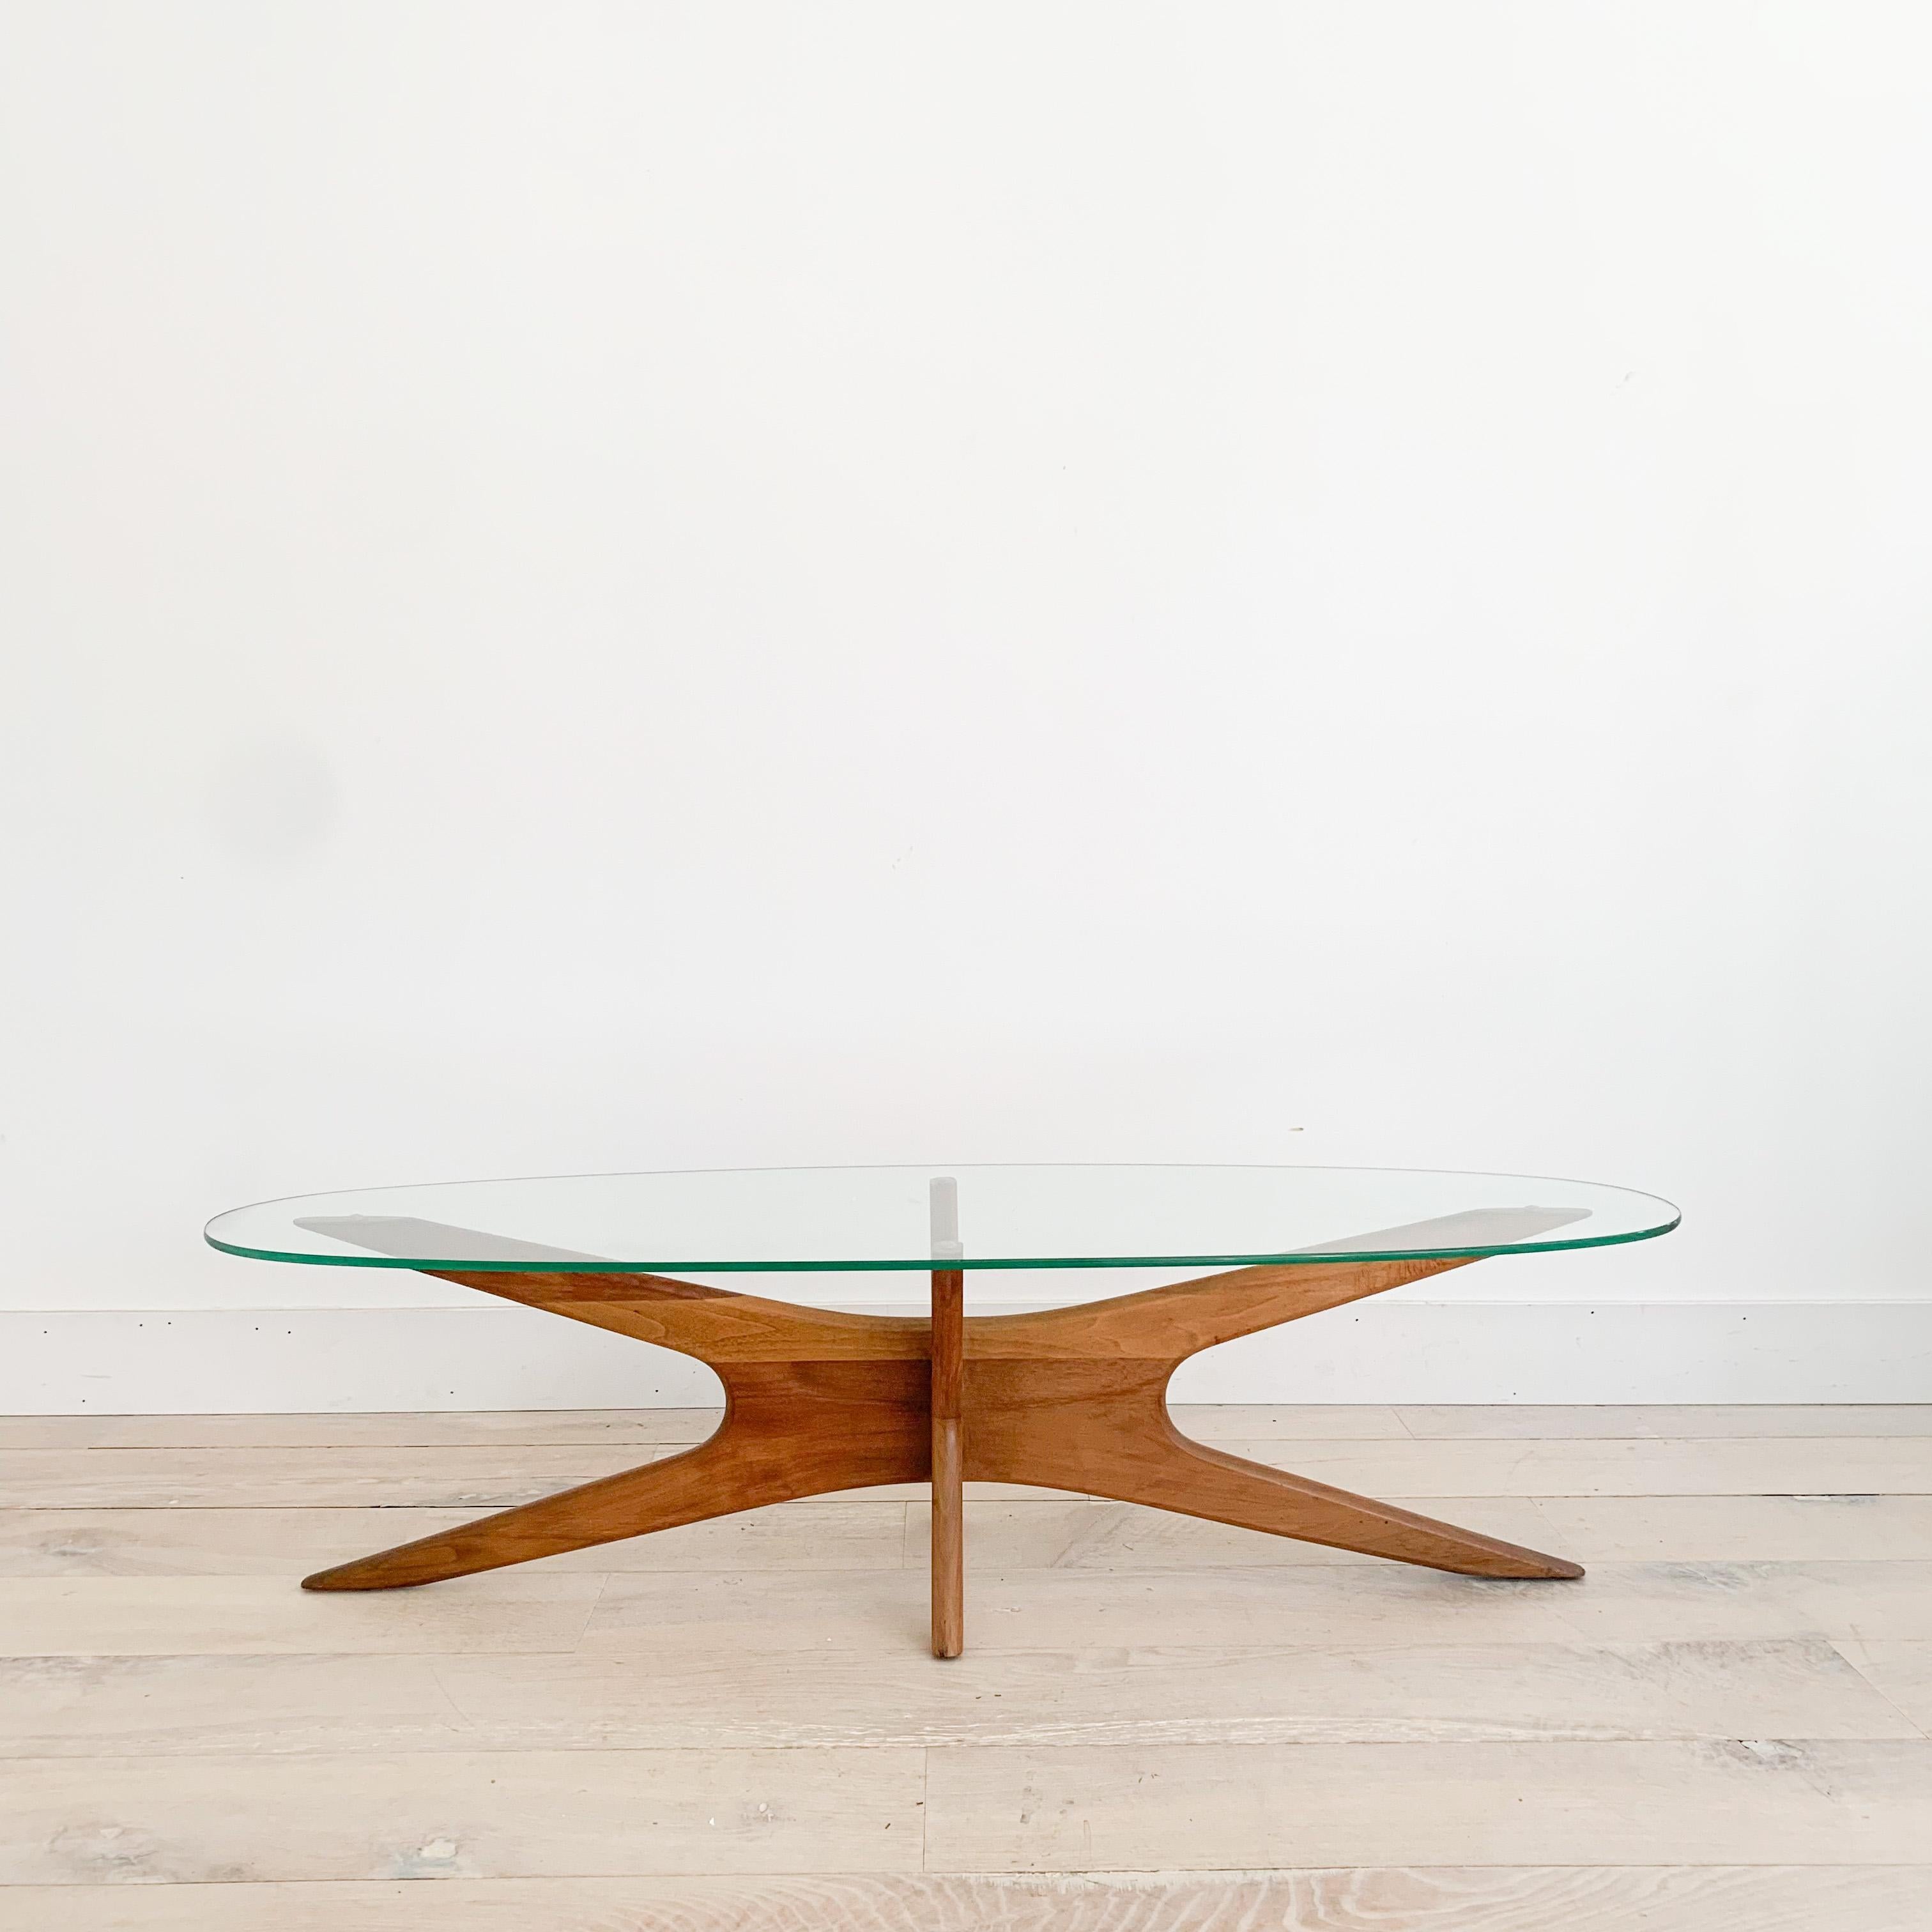 Mid century modern sculpted walnut coffee table with glass top design by Adrian Pearsall. Known as the Jacks table. Some scuffing/scratching to the glass top and the walnut frame (see up close photos).

59.25